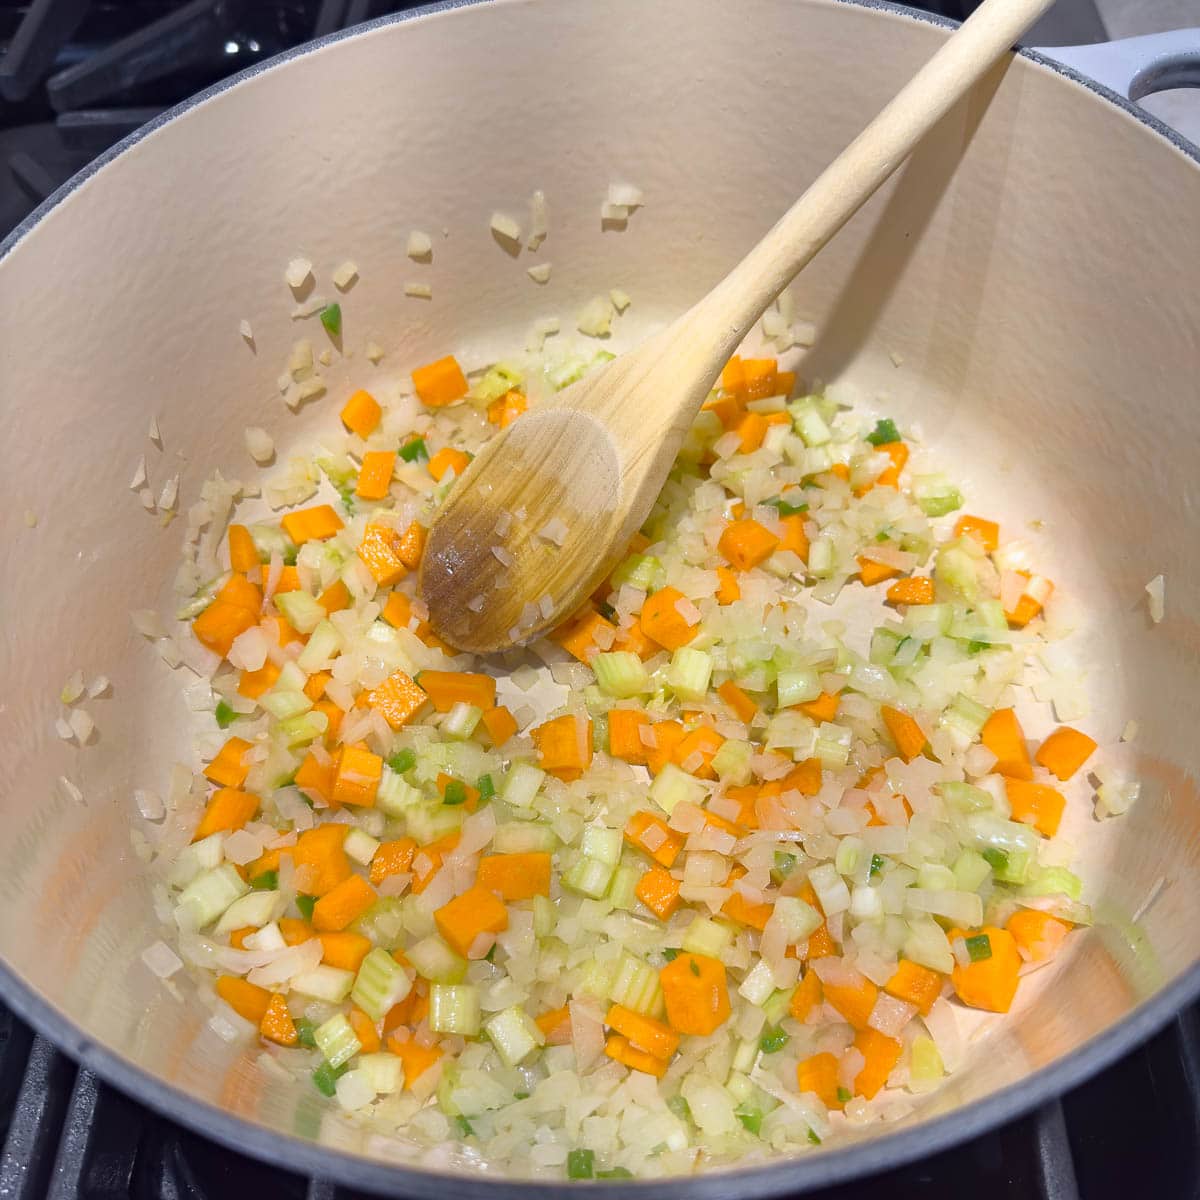 Sauteing onion, carrot, and celery for soup in a pot on stovetop.